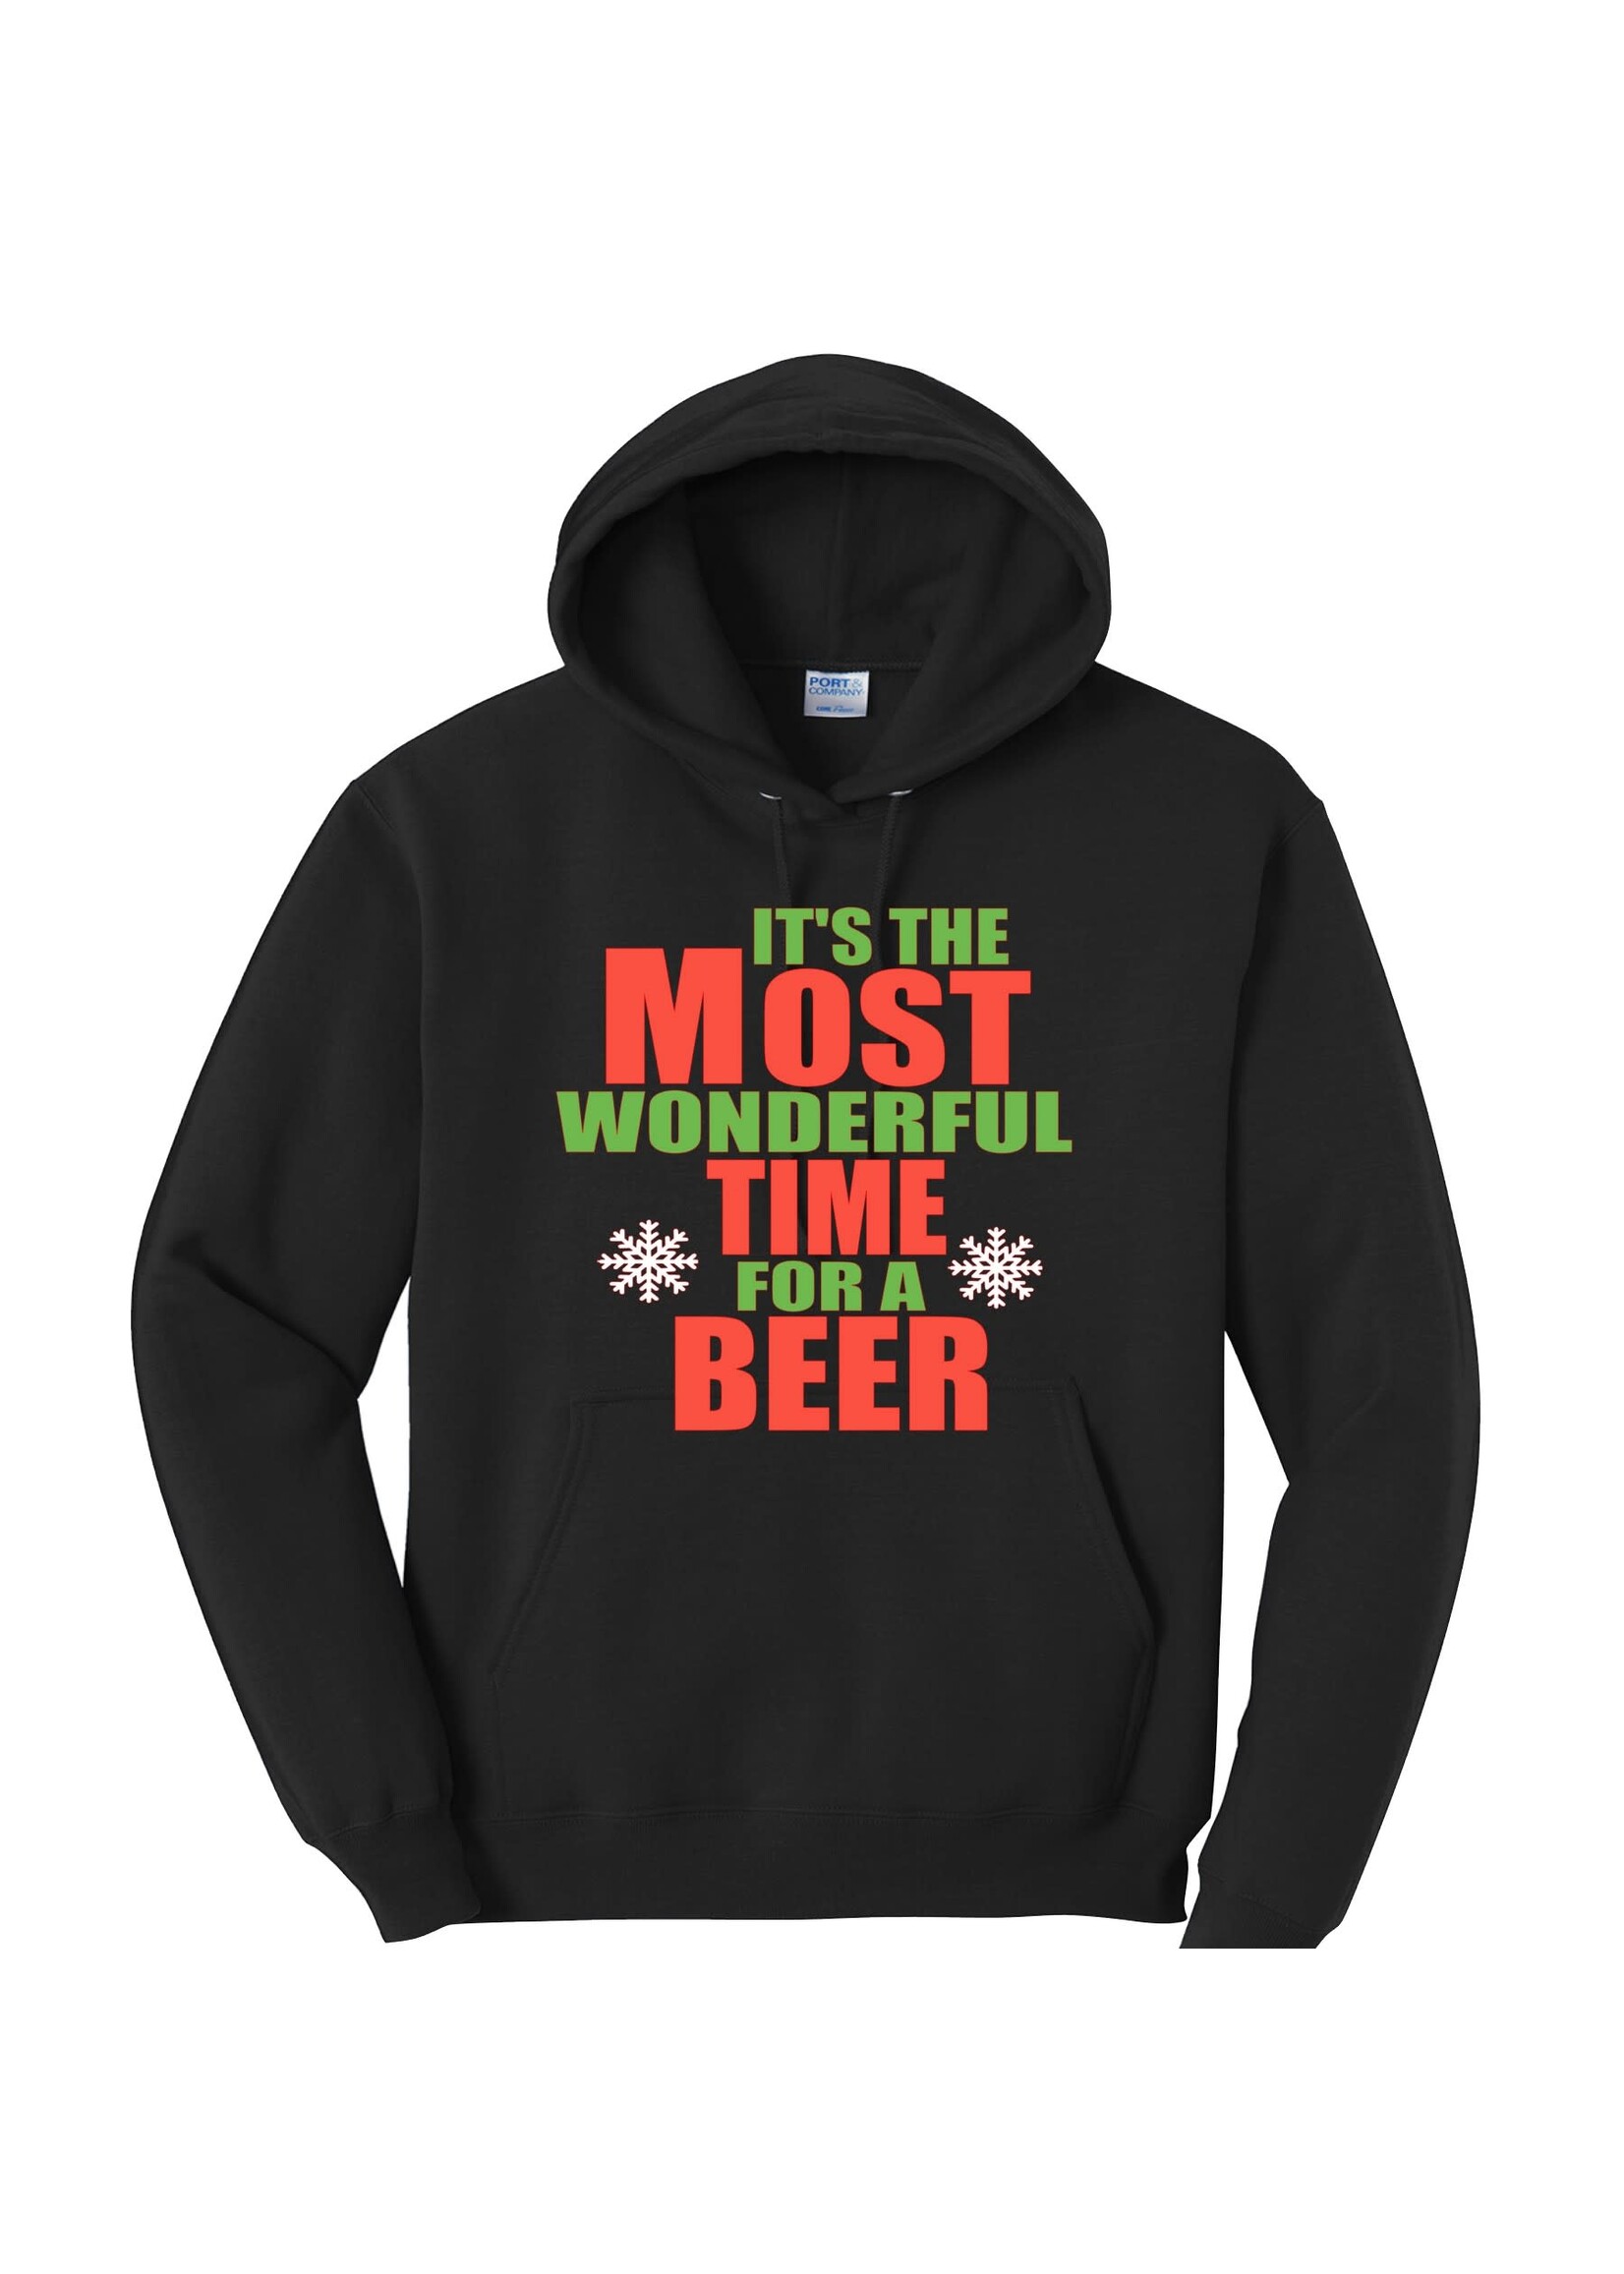 Most Wonderful Time for a Beer hoodie